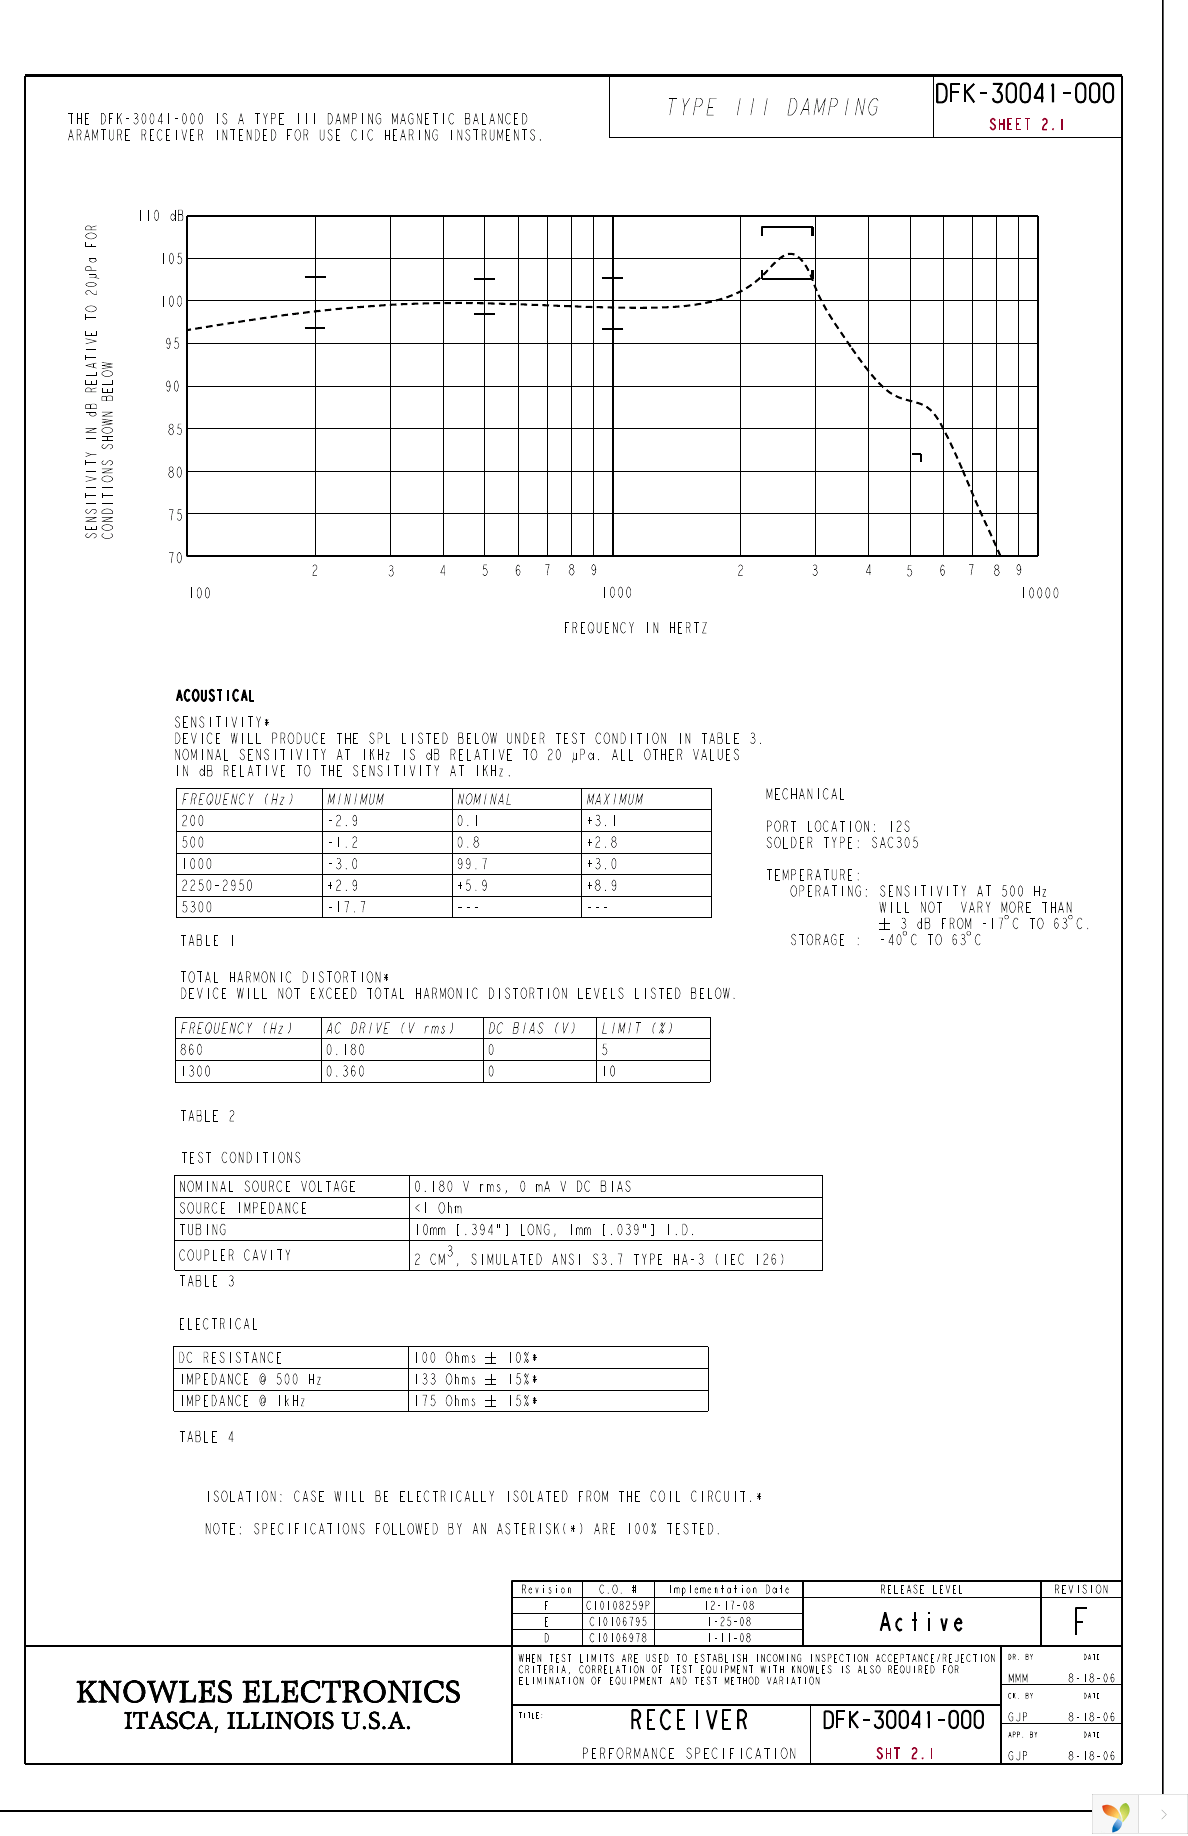 DFK-30041-000 Page 2